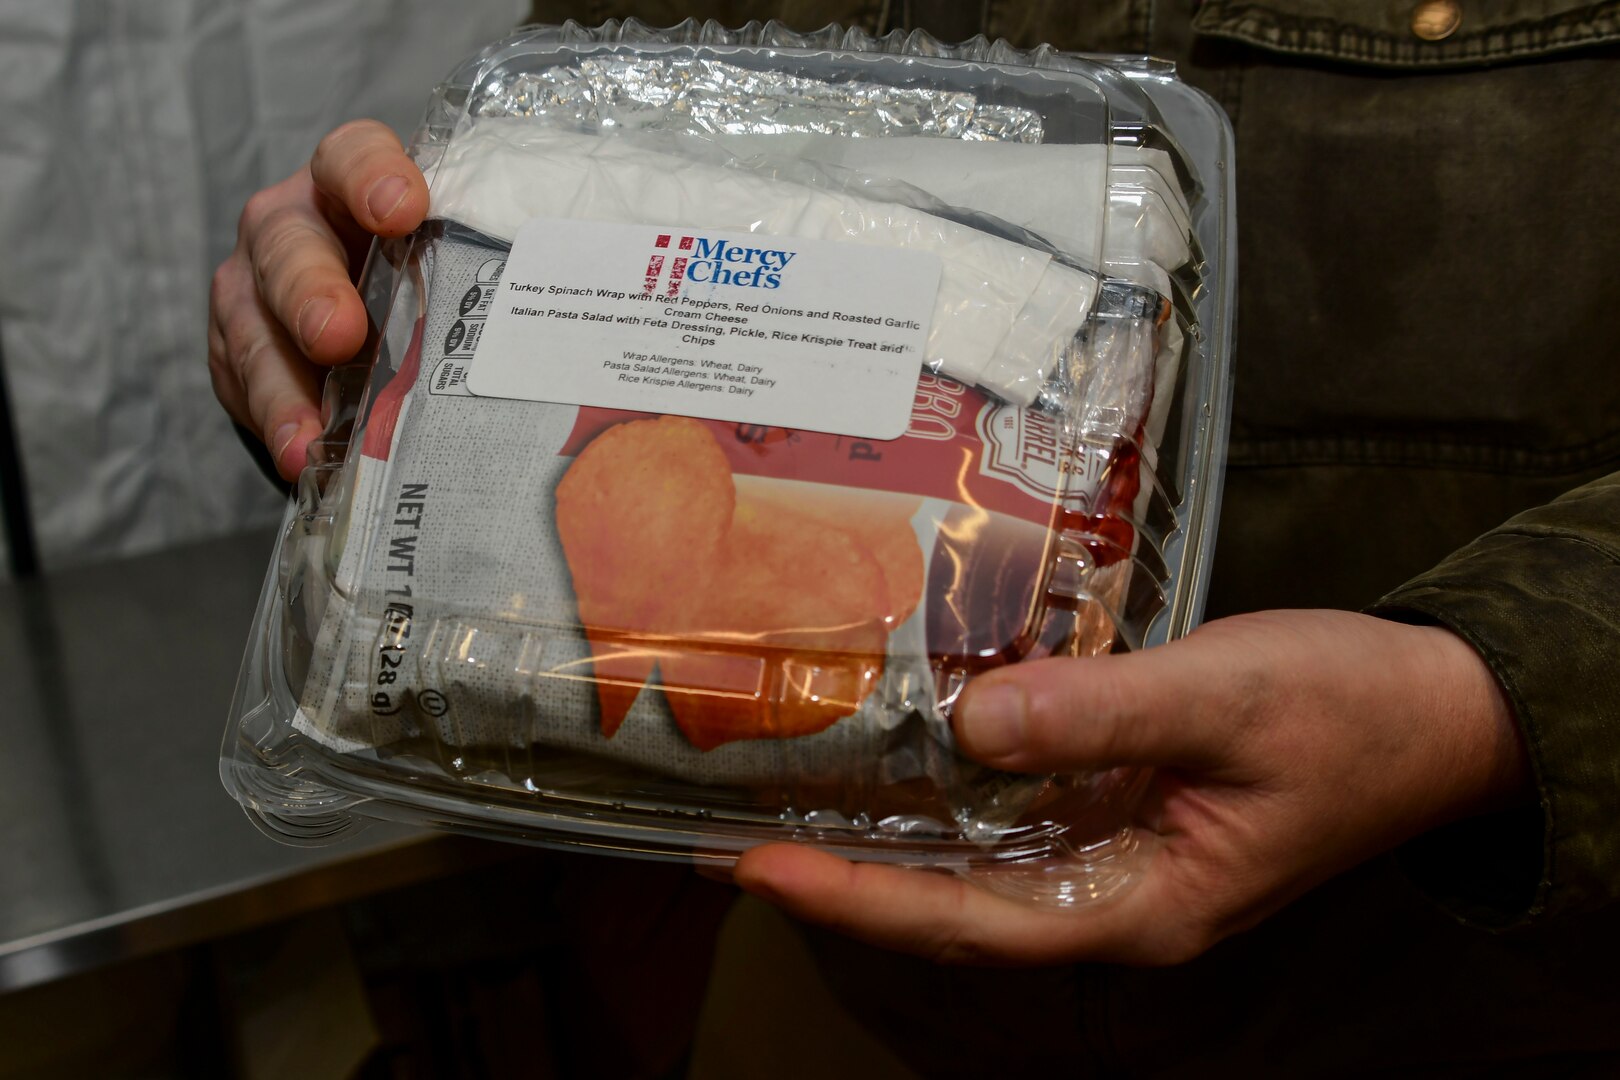 Naval Medical Center Portsmouth (NMCP) received a special delivery from Mercy Chefs as they assist in the command’s battle against COVID-19, Dec. 29.